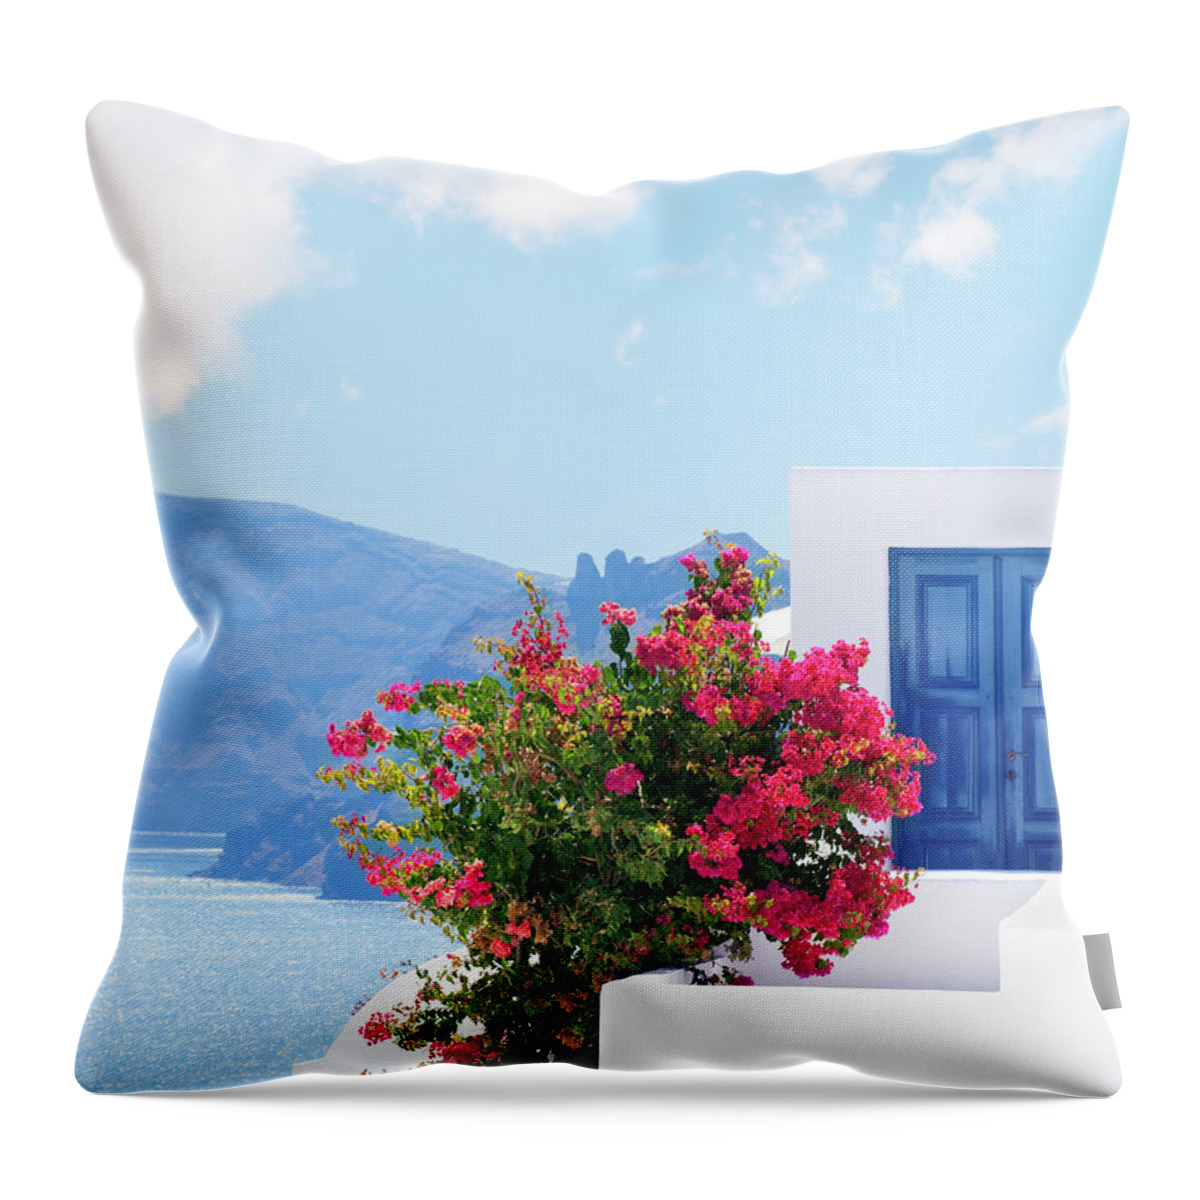 Scenics Throw Pillow featuring the photograph Sea View From Hotel by Swetta